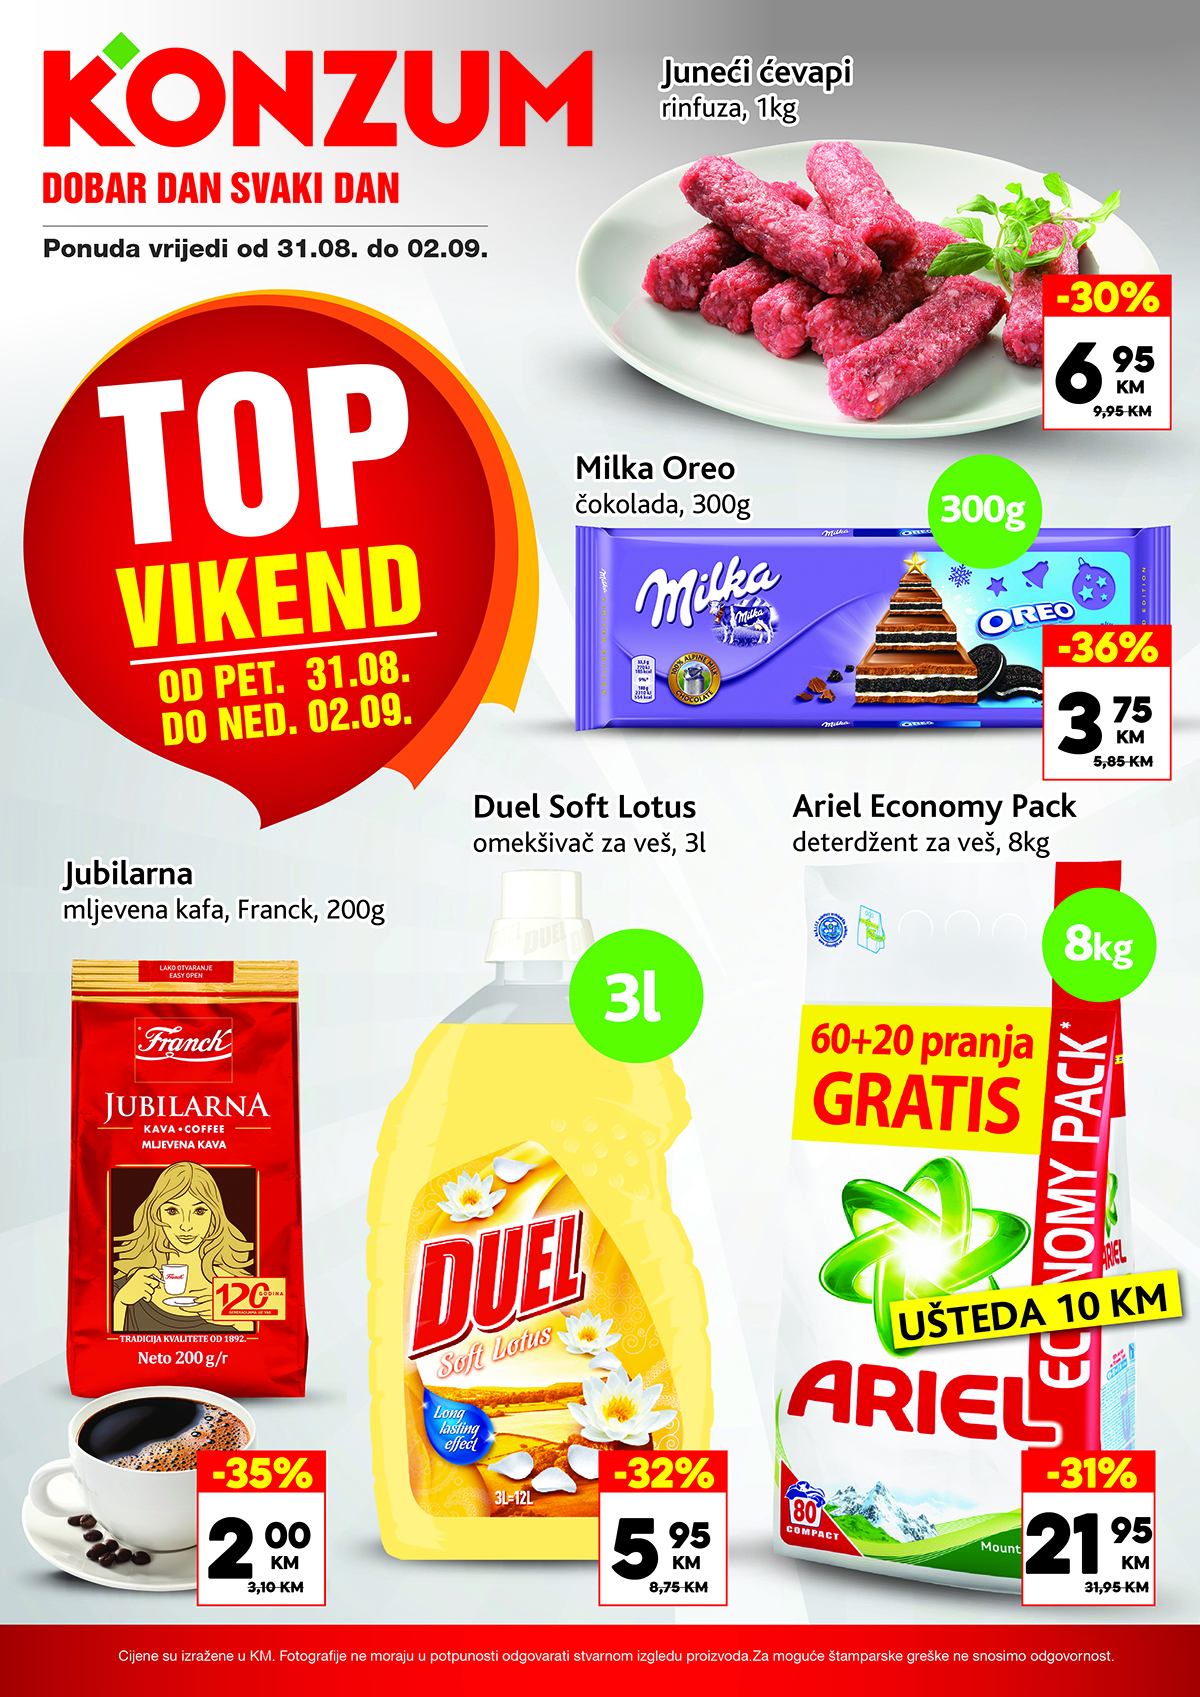 Top vikend preview BO